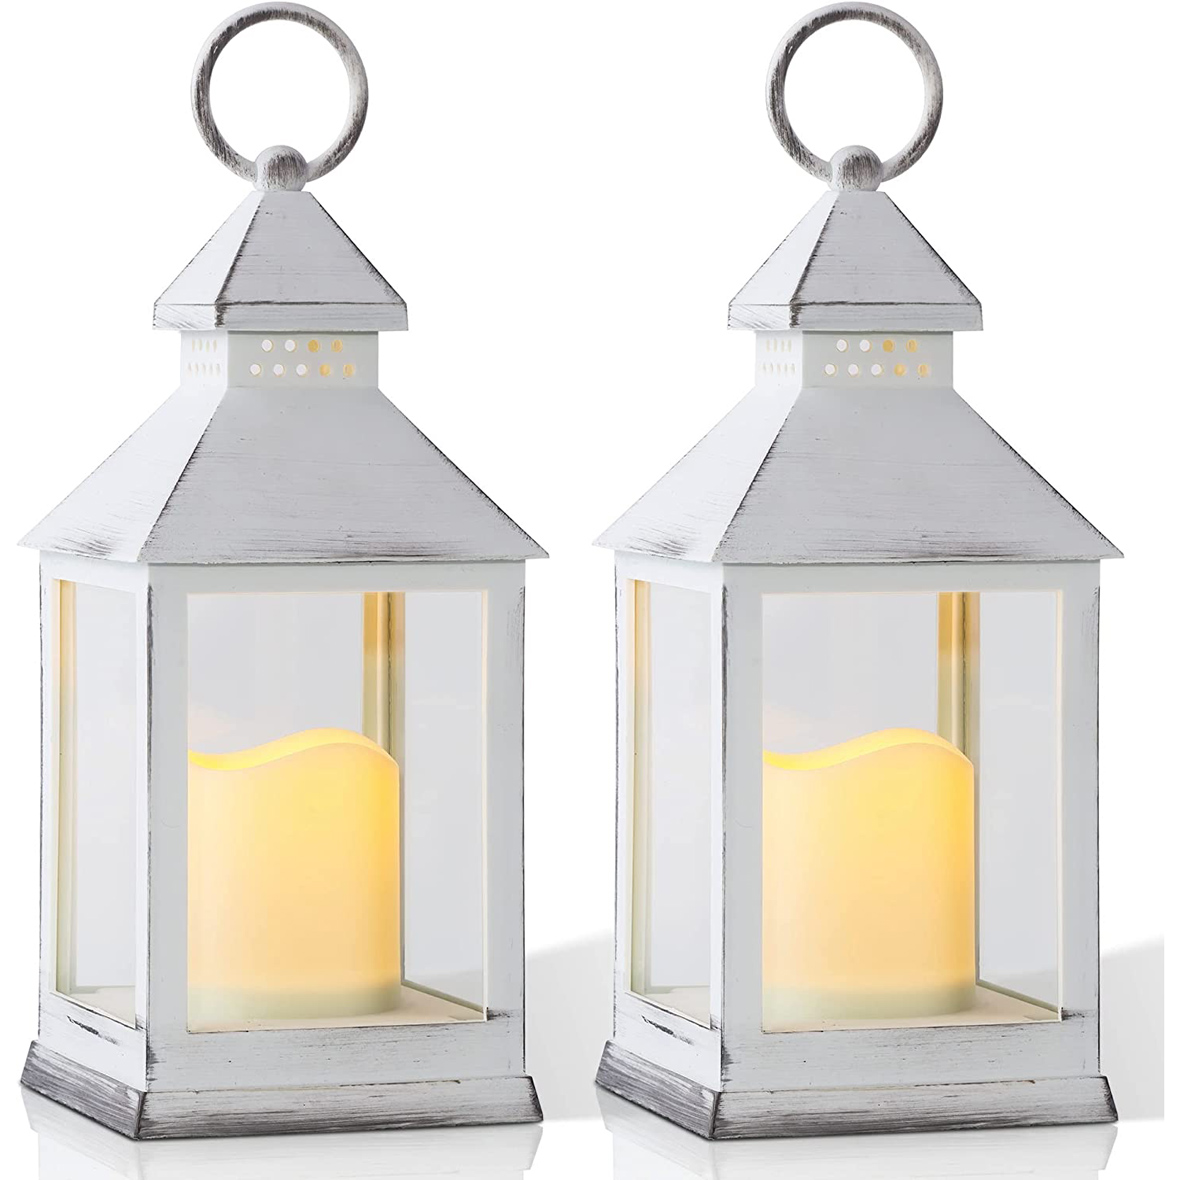 Yongmao White Vintage Lantern Decorative LED Flickering Flameless Candle with Timer, Battery Powered LED Decorative Hanging Lanterns for Indoor Outdoor Wedding Yard Home Decor(2 Pack)